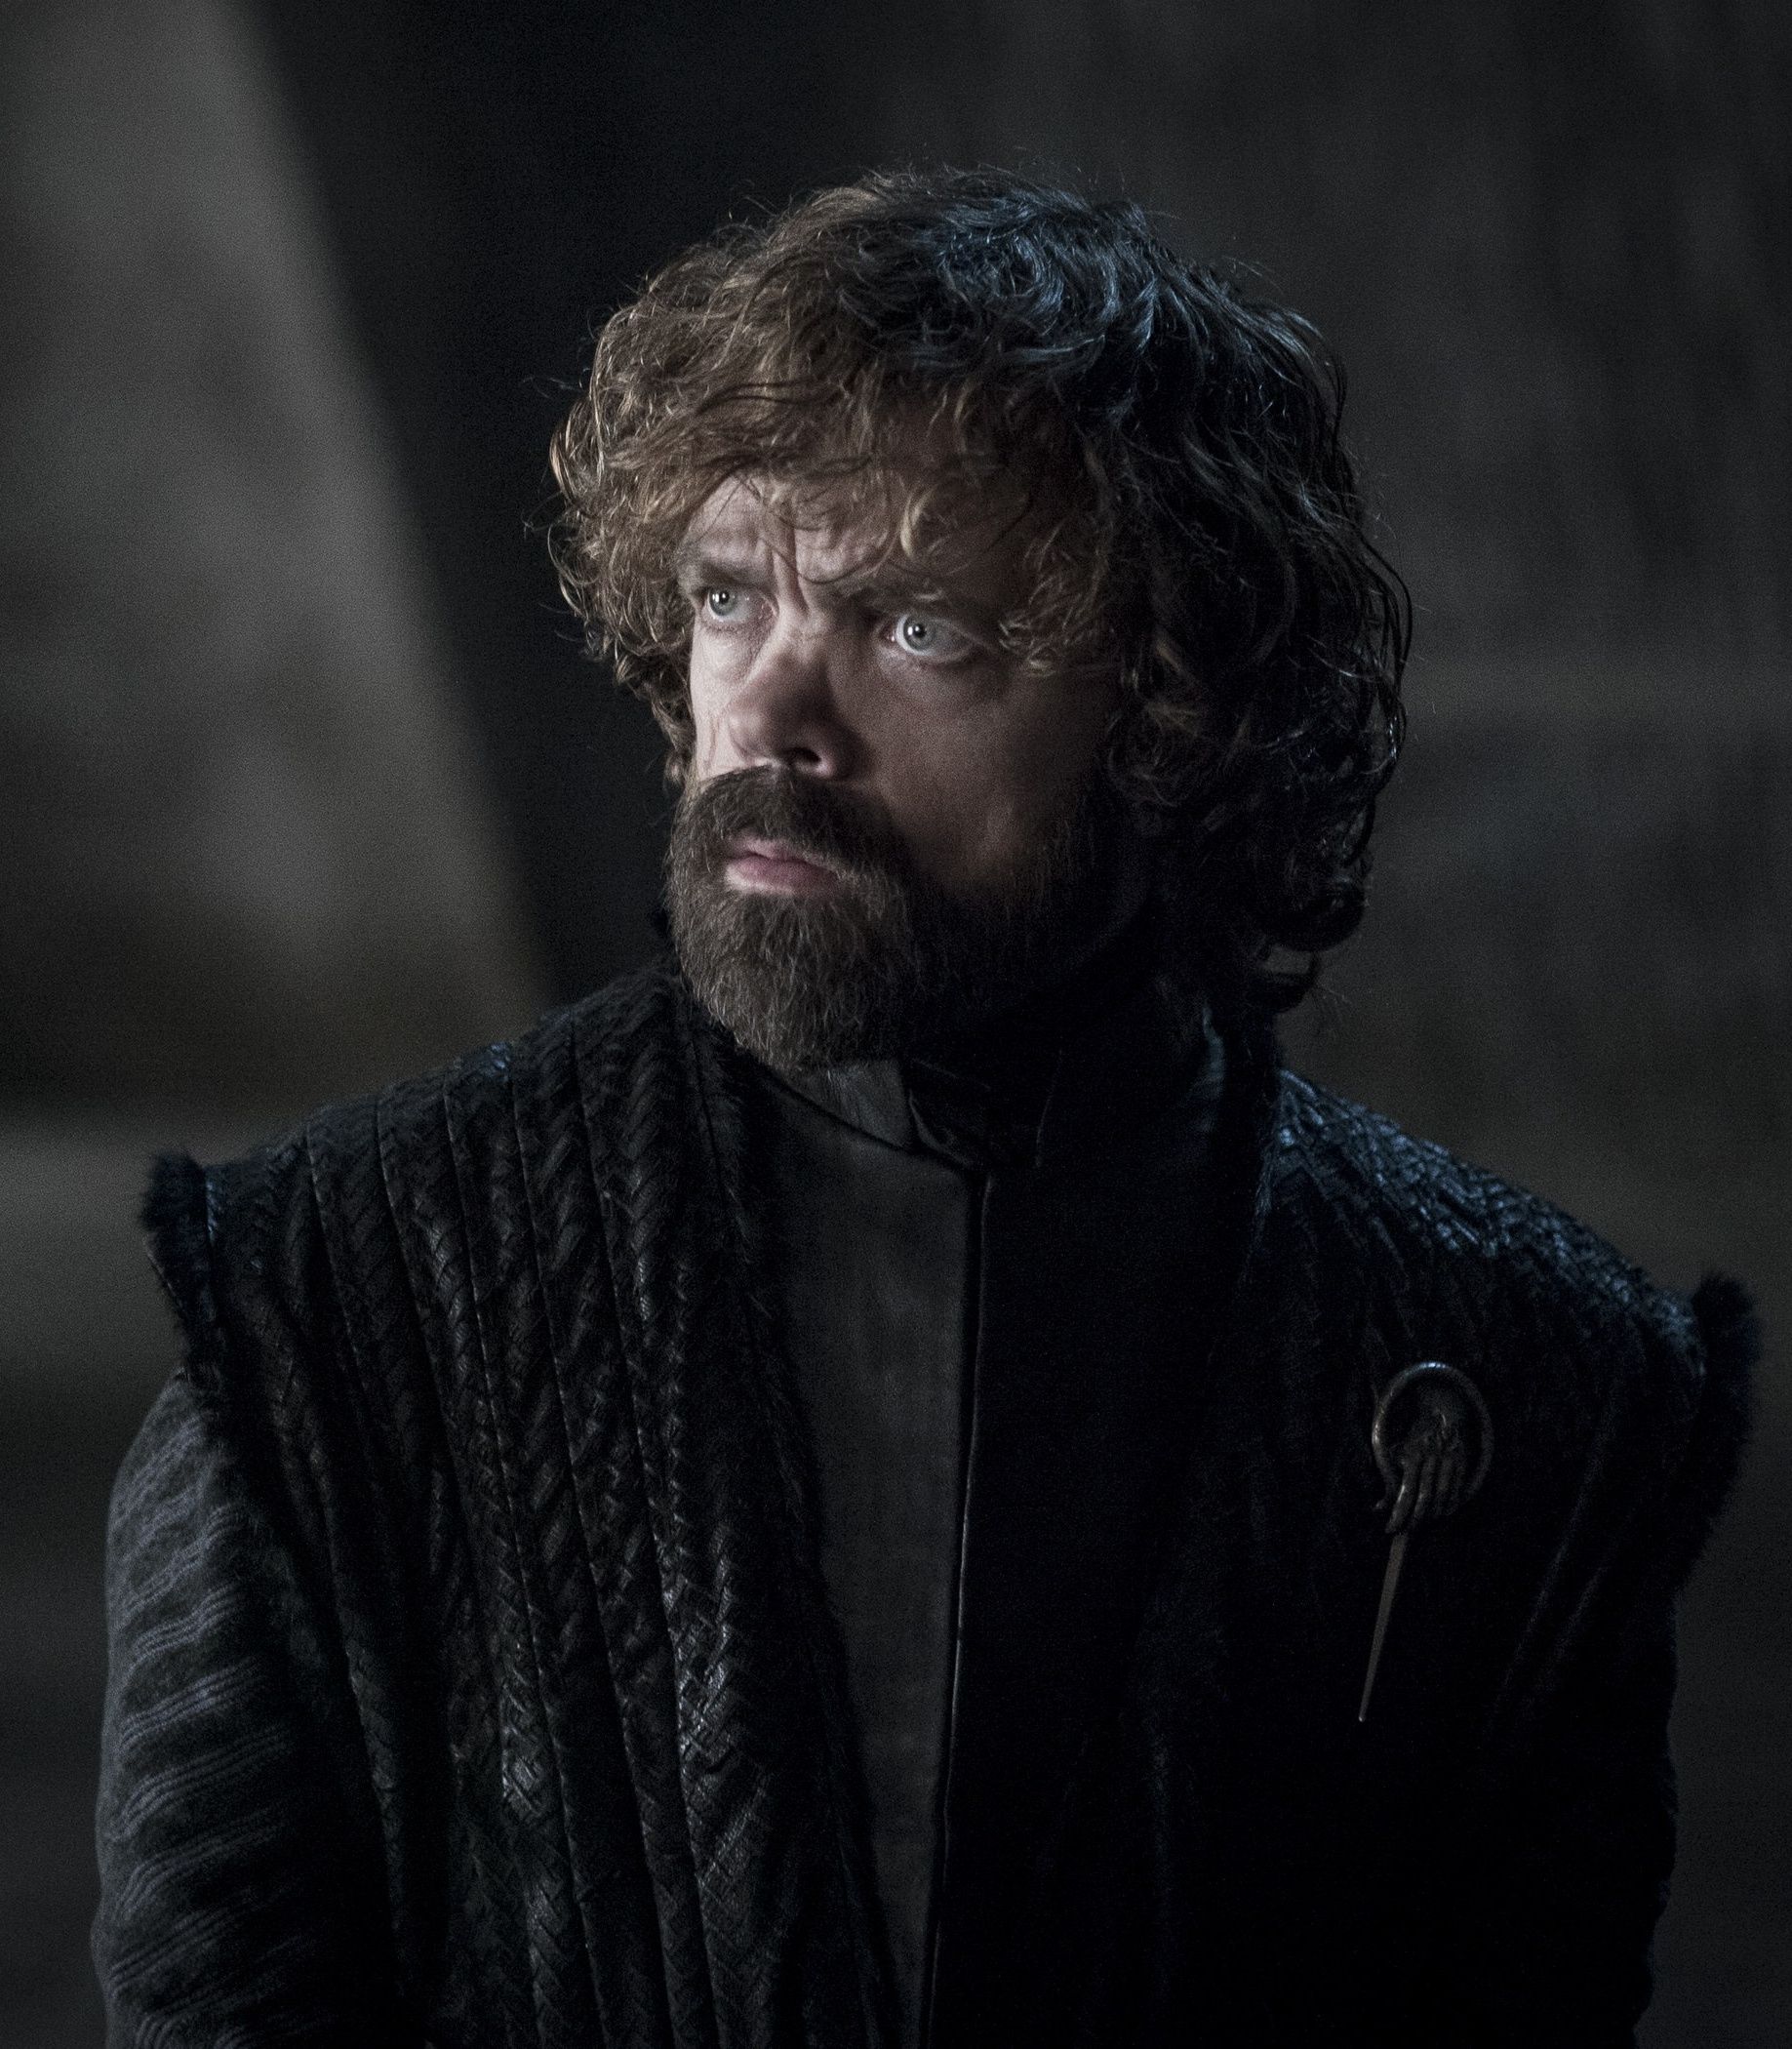 Peter Dinklage as Tyrion Lannister in Game of Thrones Vertical TLDR